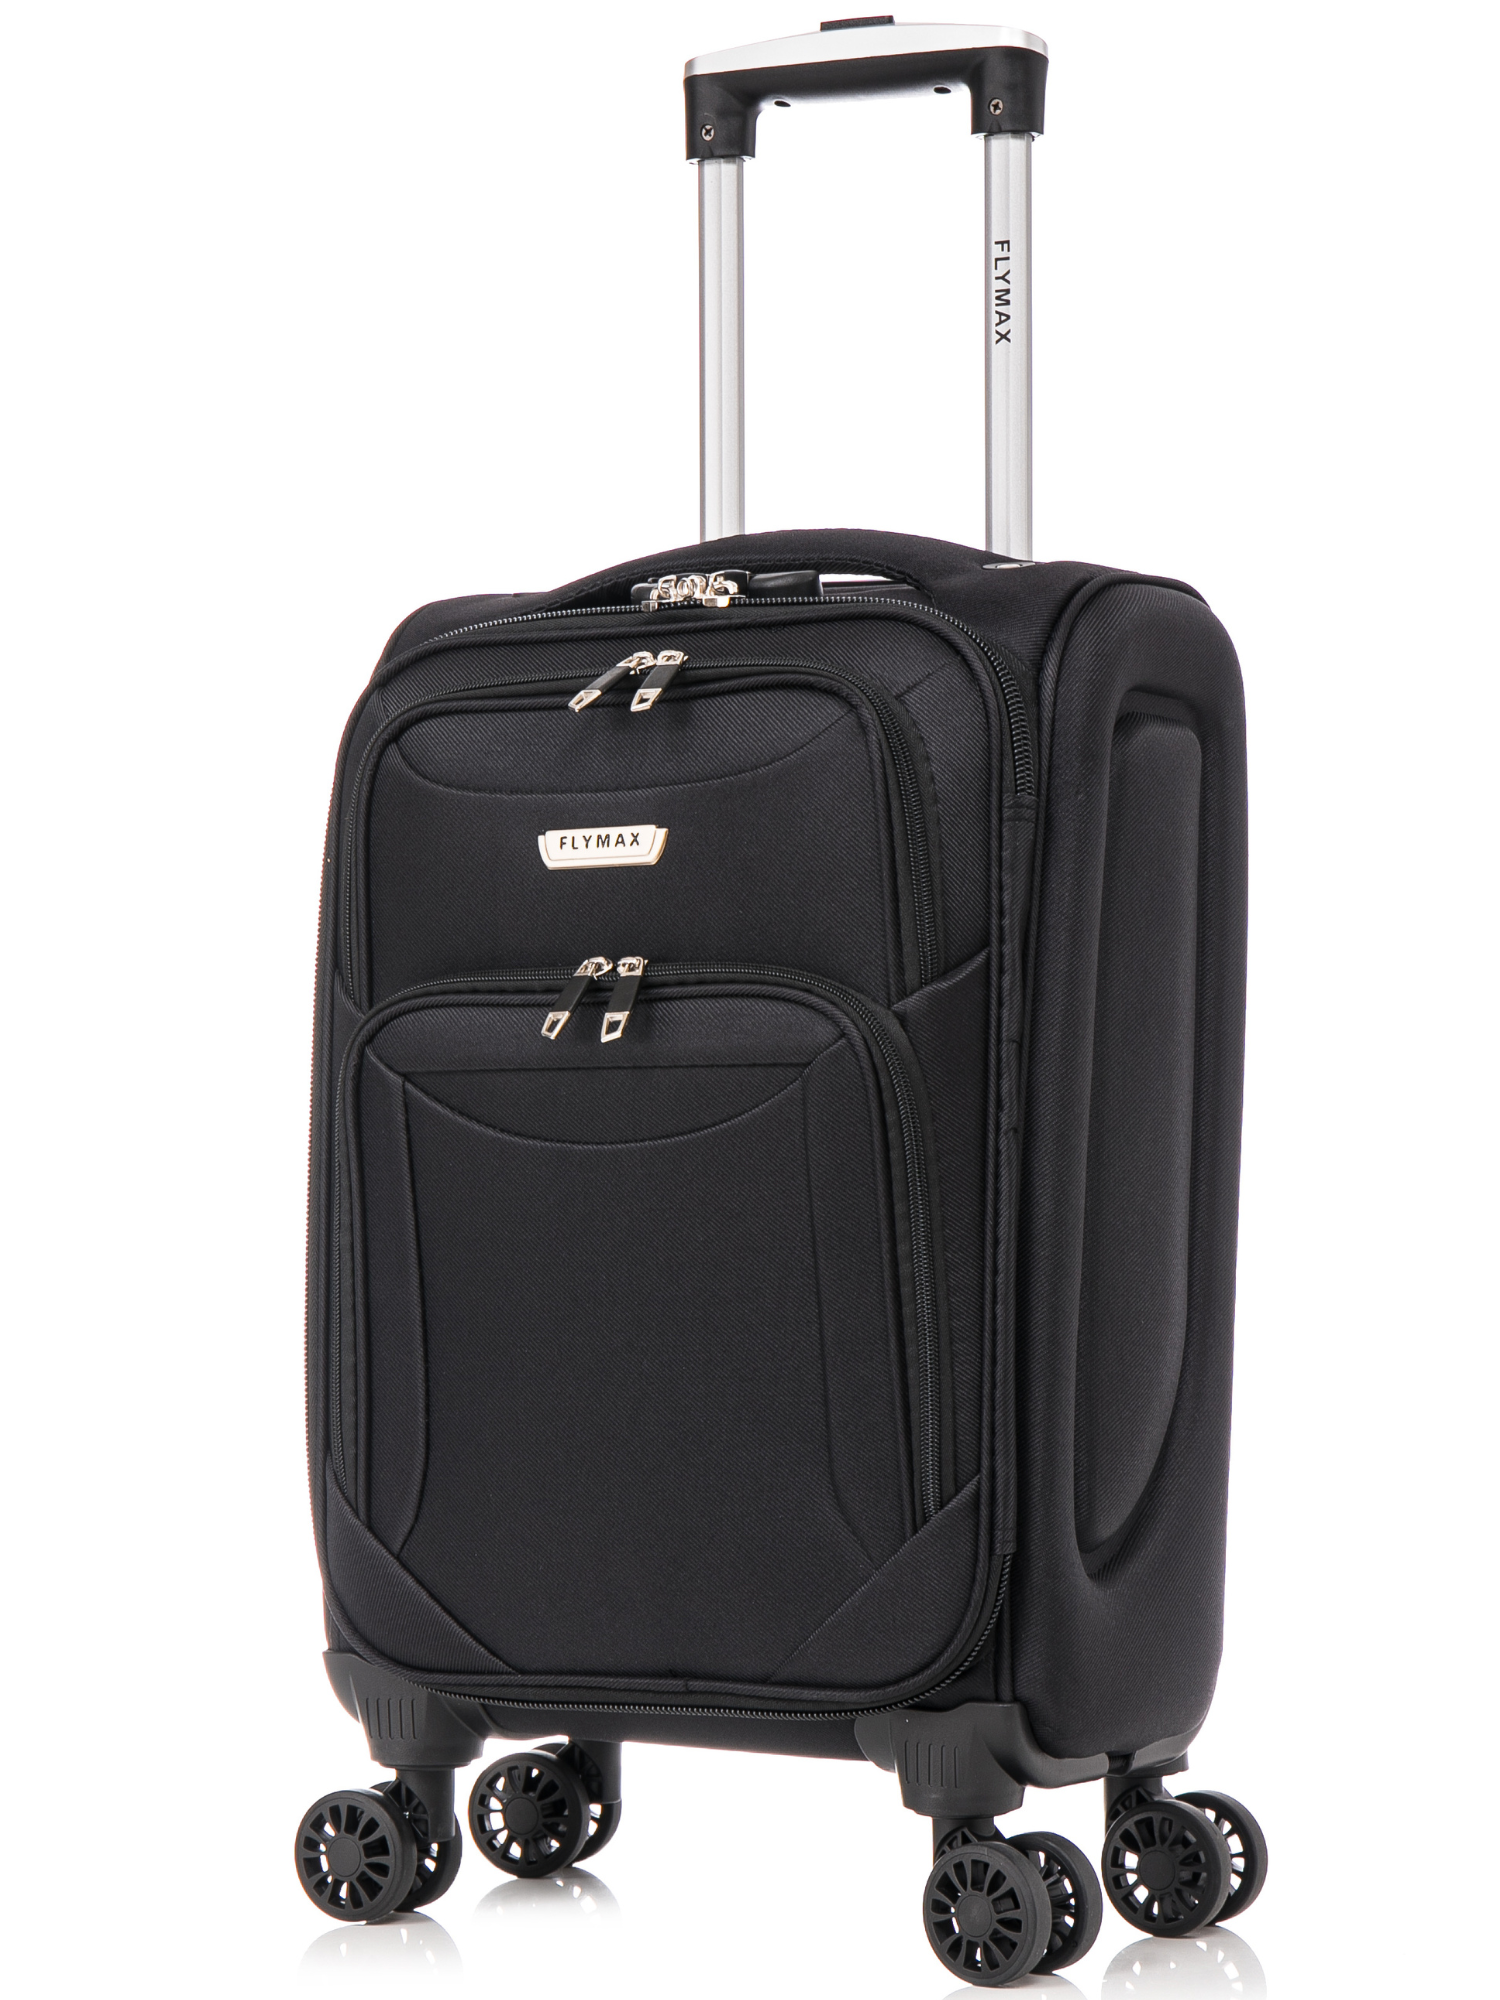 Cabin Carry on Flight Bag Approved Hand Luggage Case Hold Suitcase 55x35x20 Fits Ryanair Easyjet